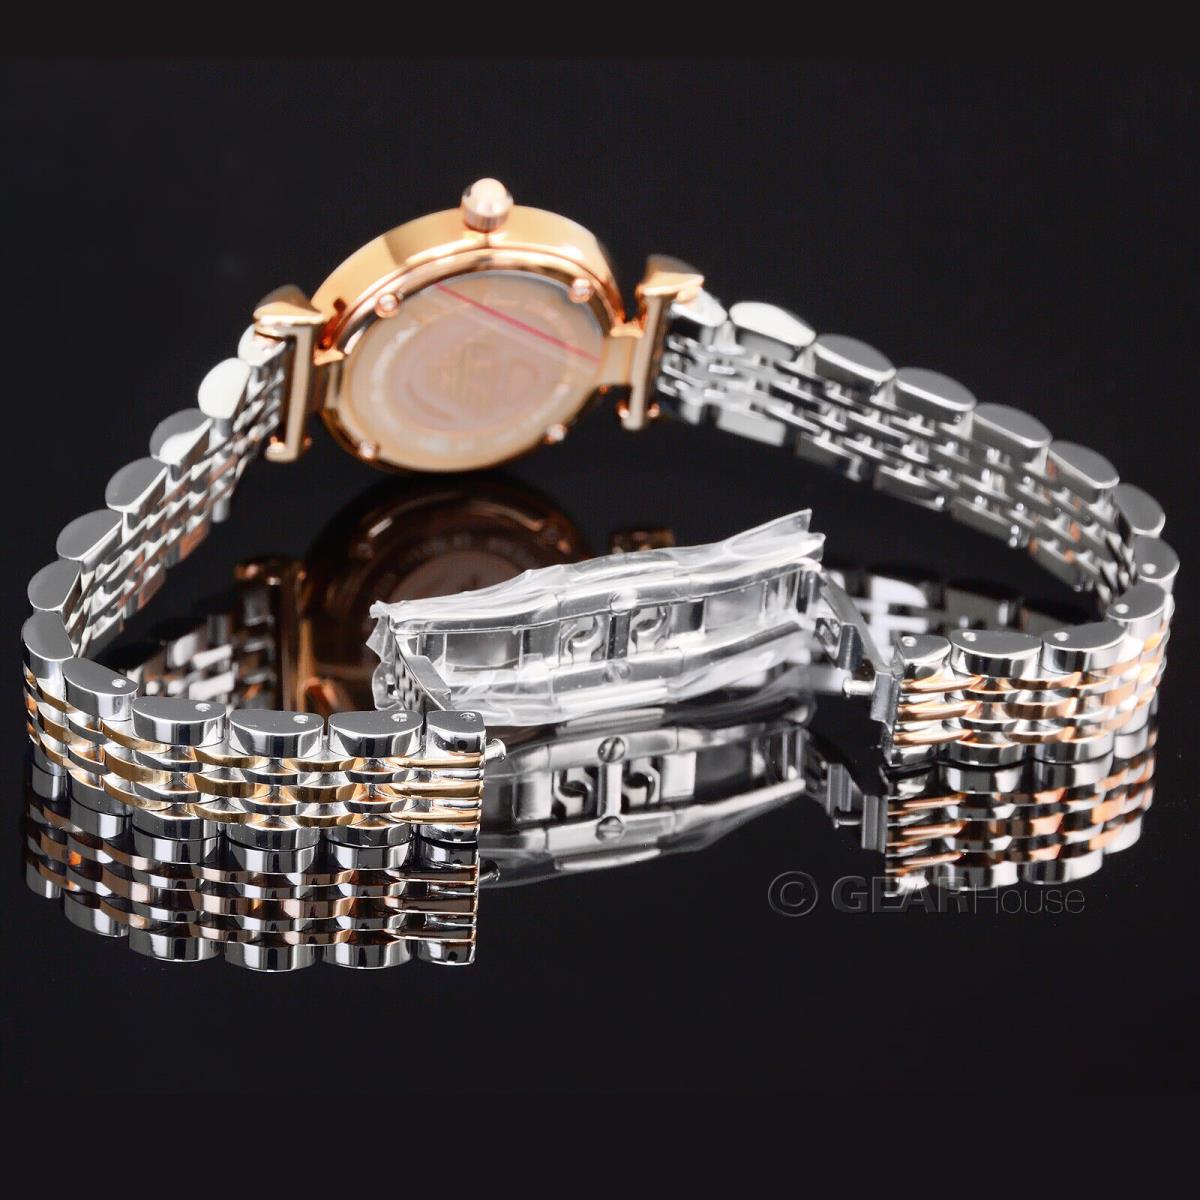 Emporio Armani watch  - Rose Gold Dial, Rose Gold Band, Rose Gold Bezel